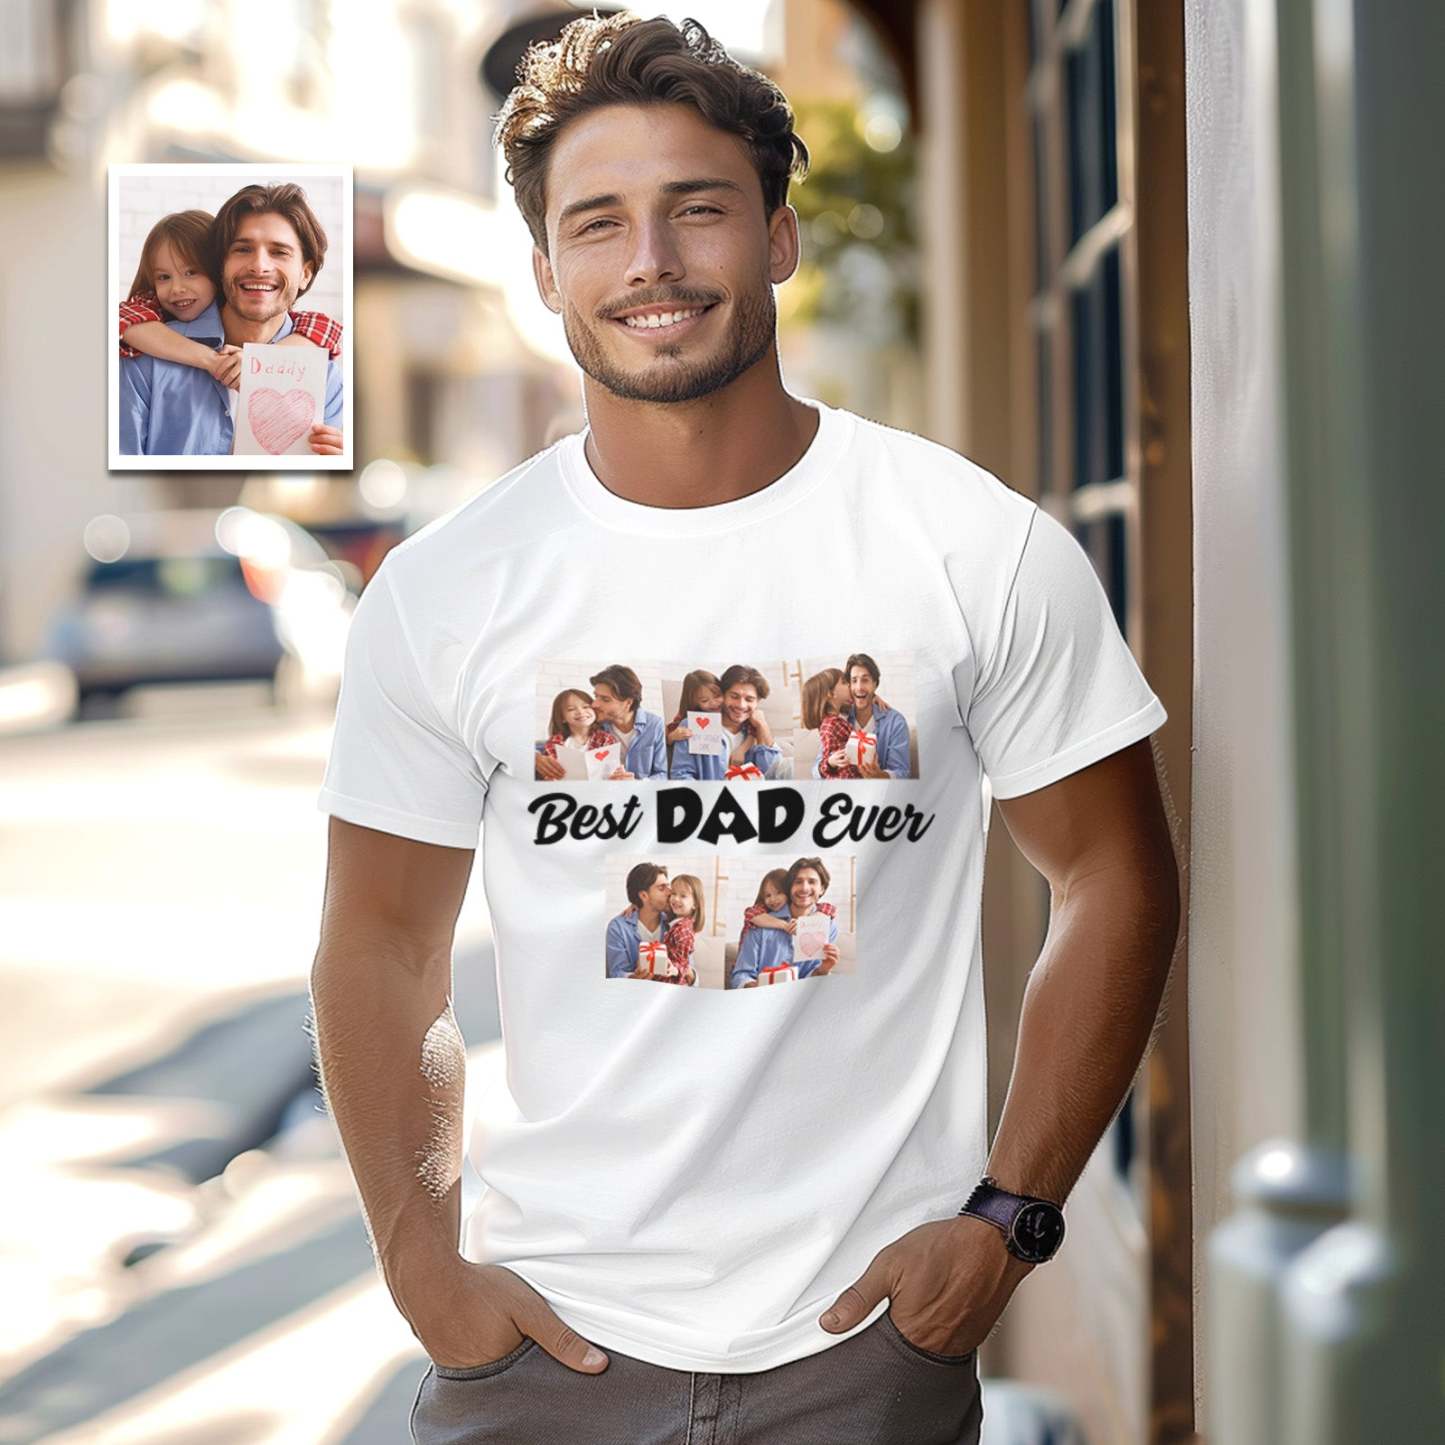 Custom Photo T-Shirt With Best Dad Ever Personalized Photos T-Shirt Father's Day Gift